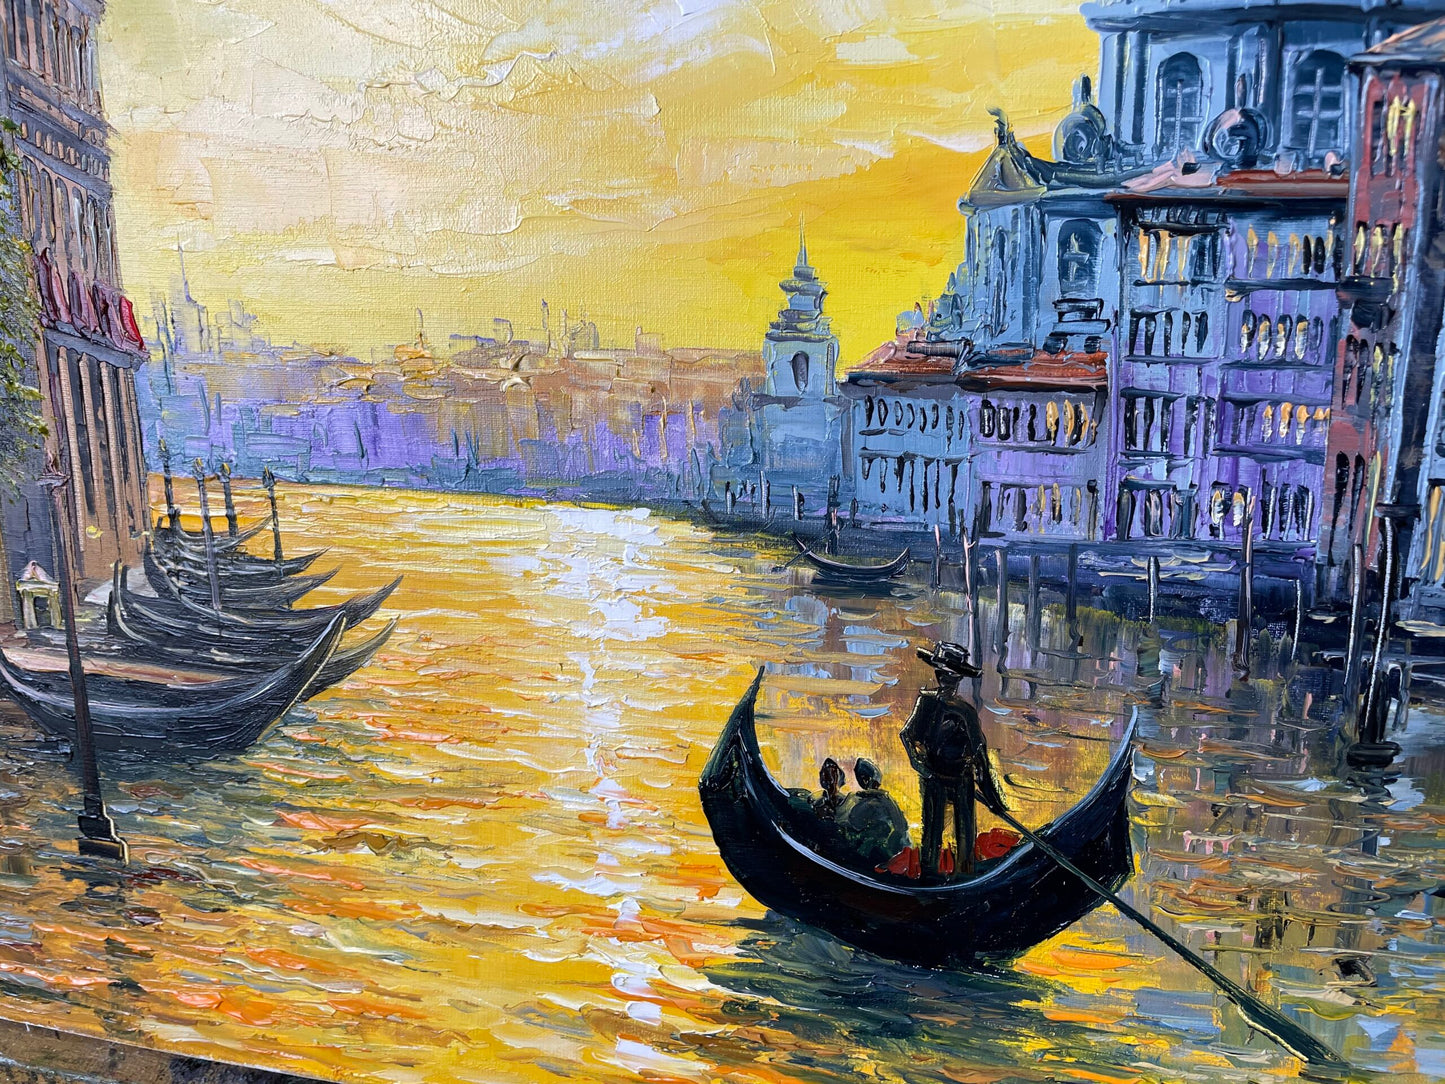 Sunset in Venice Oil Painting Original Italy Wall Art Framed The Grand Canal Venice Painting on Canvas